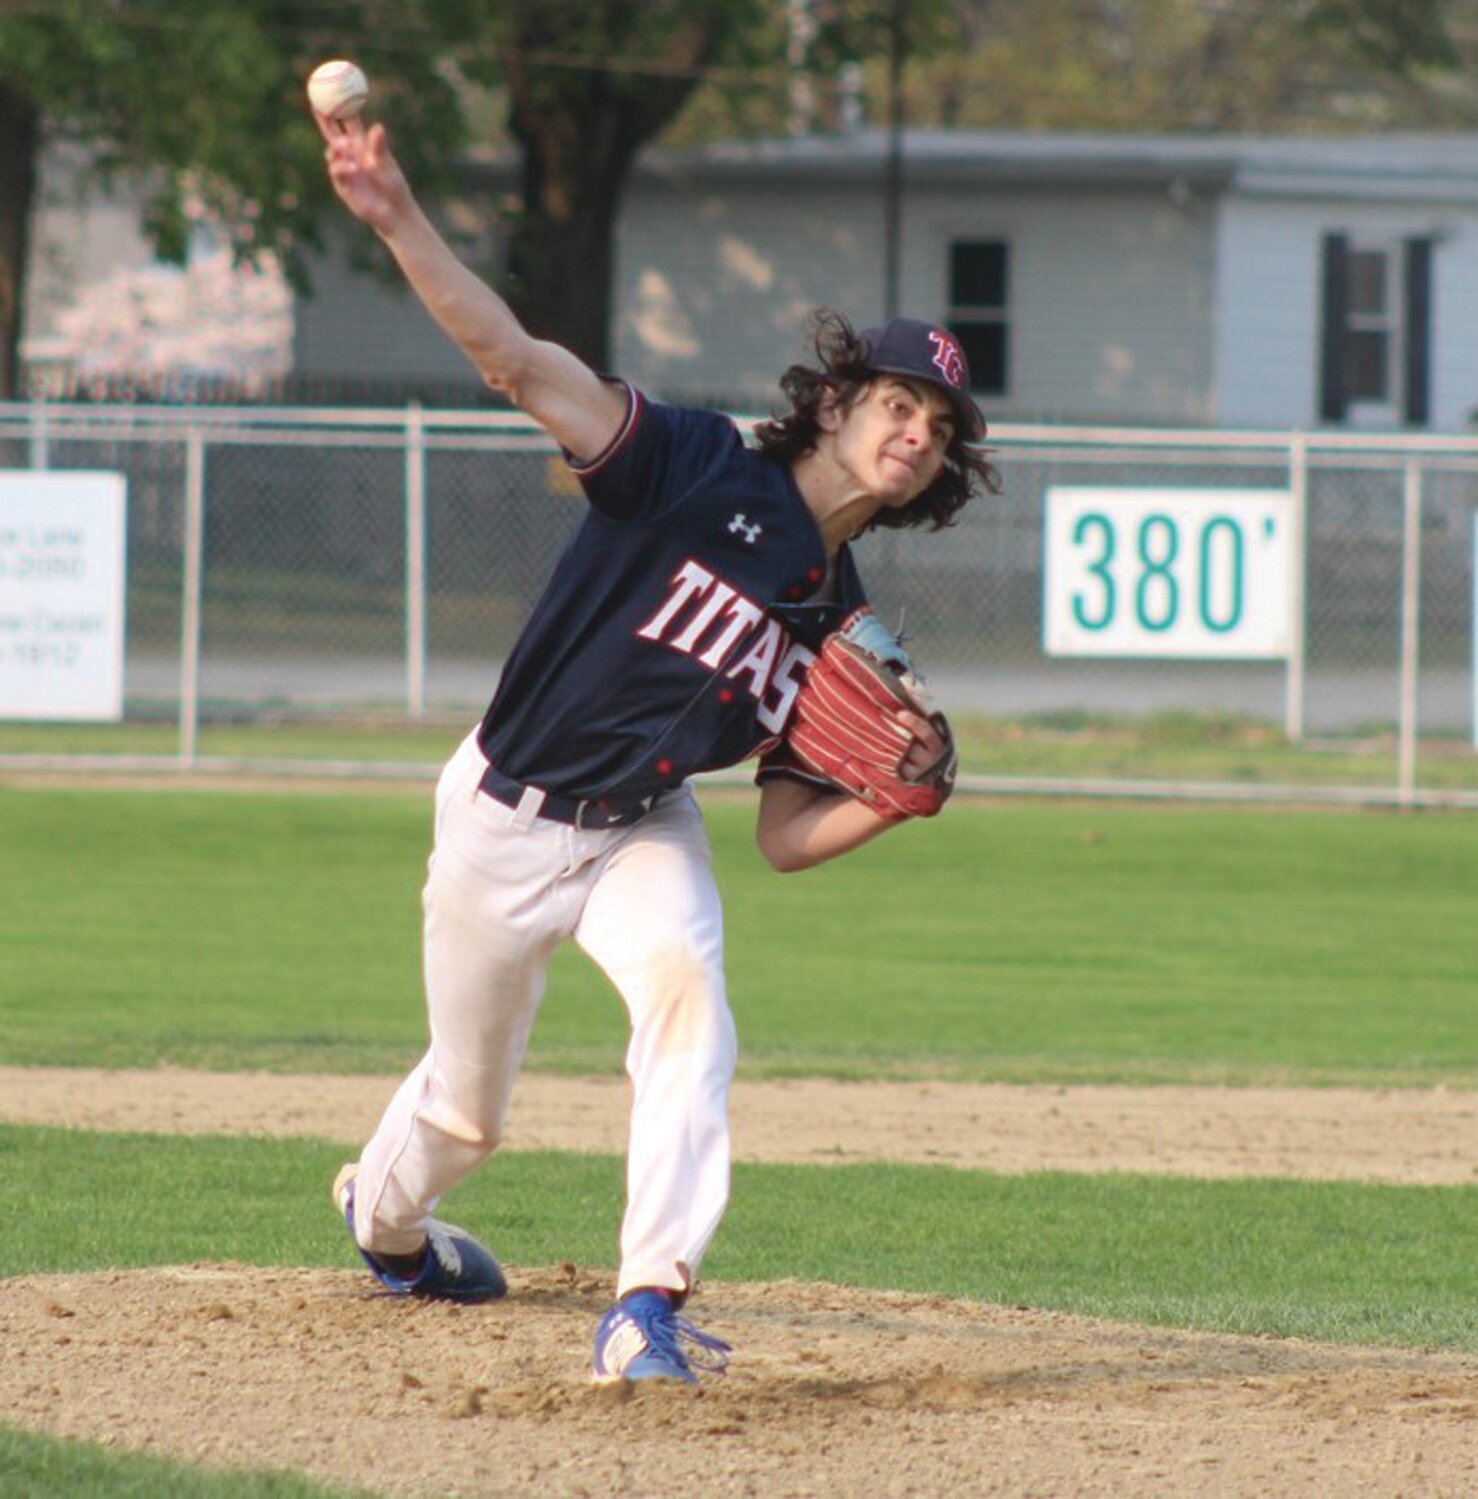 ON THE MOUND: Luca Barletta delivers a pitch.